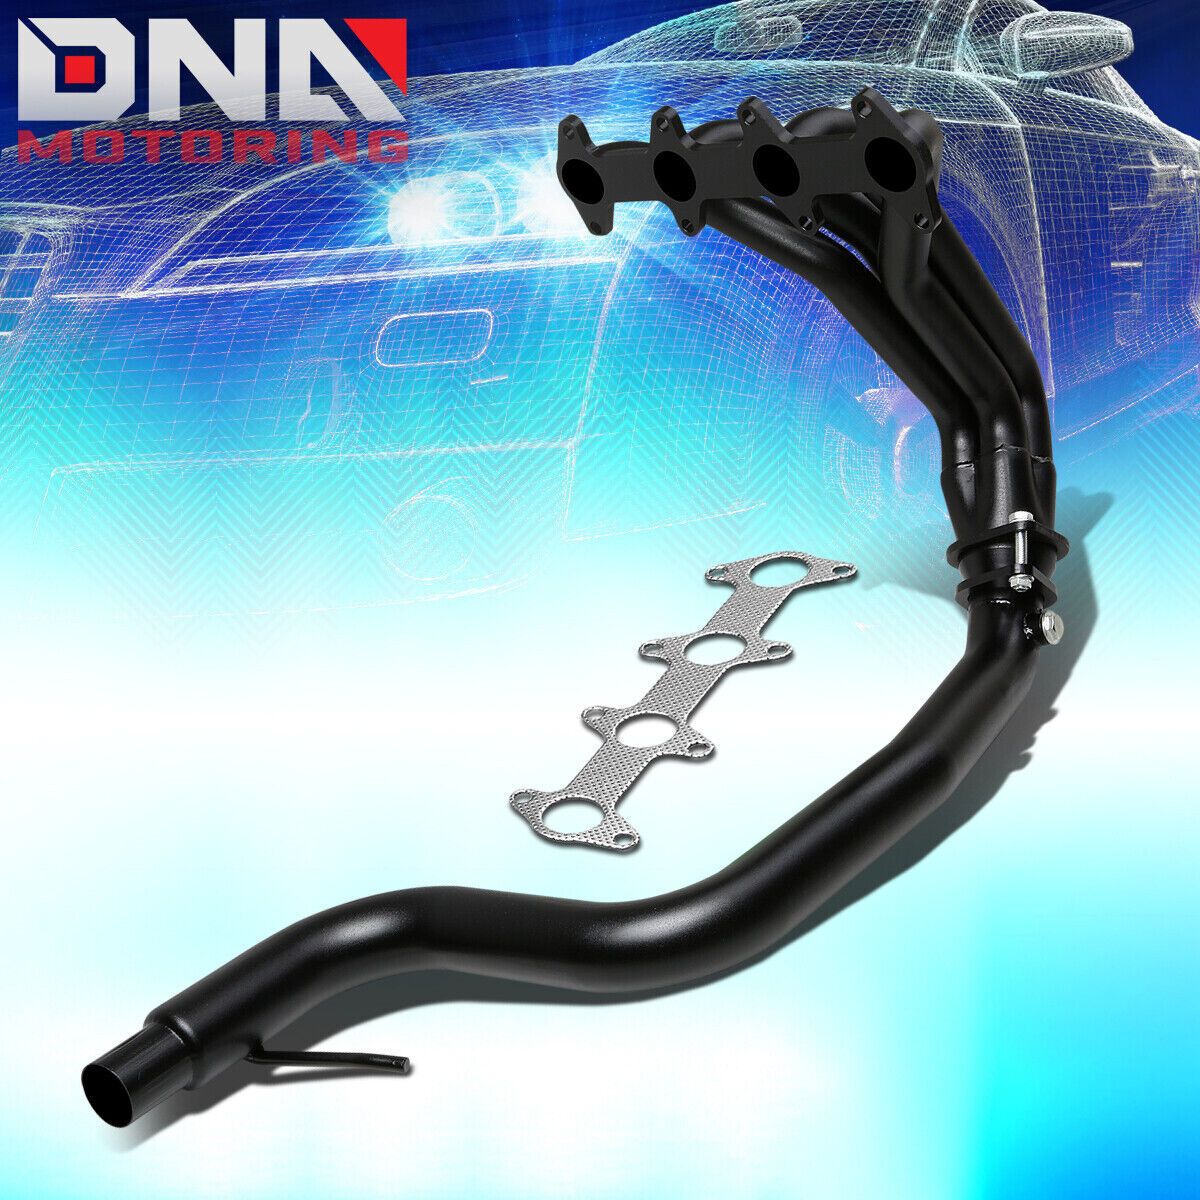 FOR 95-02 CAVALIER SUNFIRE 2.2L BLACK STAINLESS RACING HEADER MANIFOLD/EXHAUST